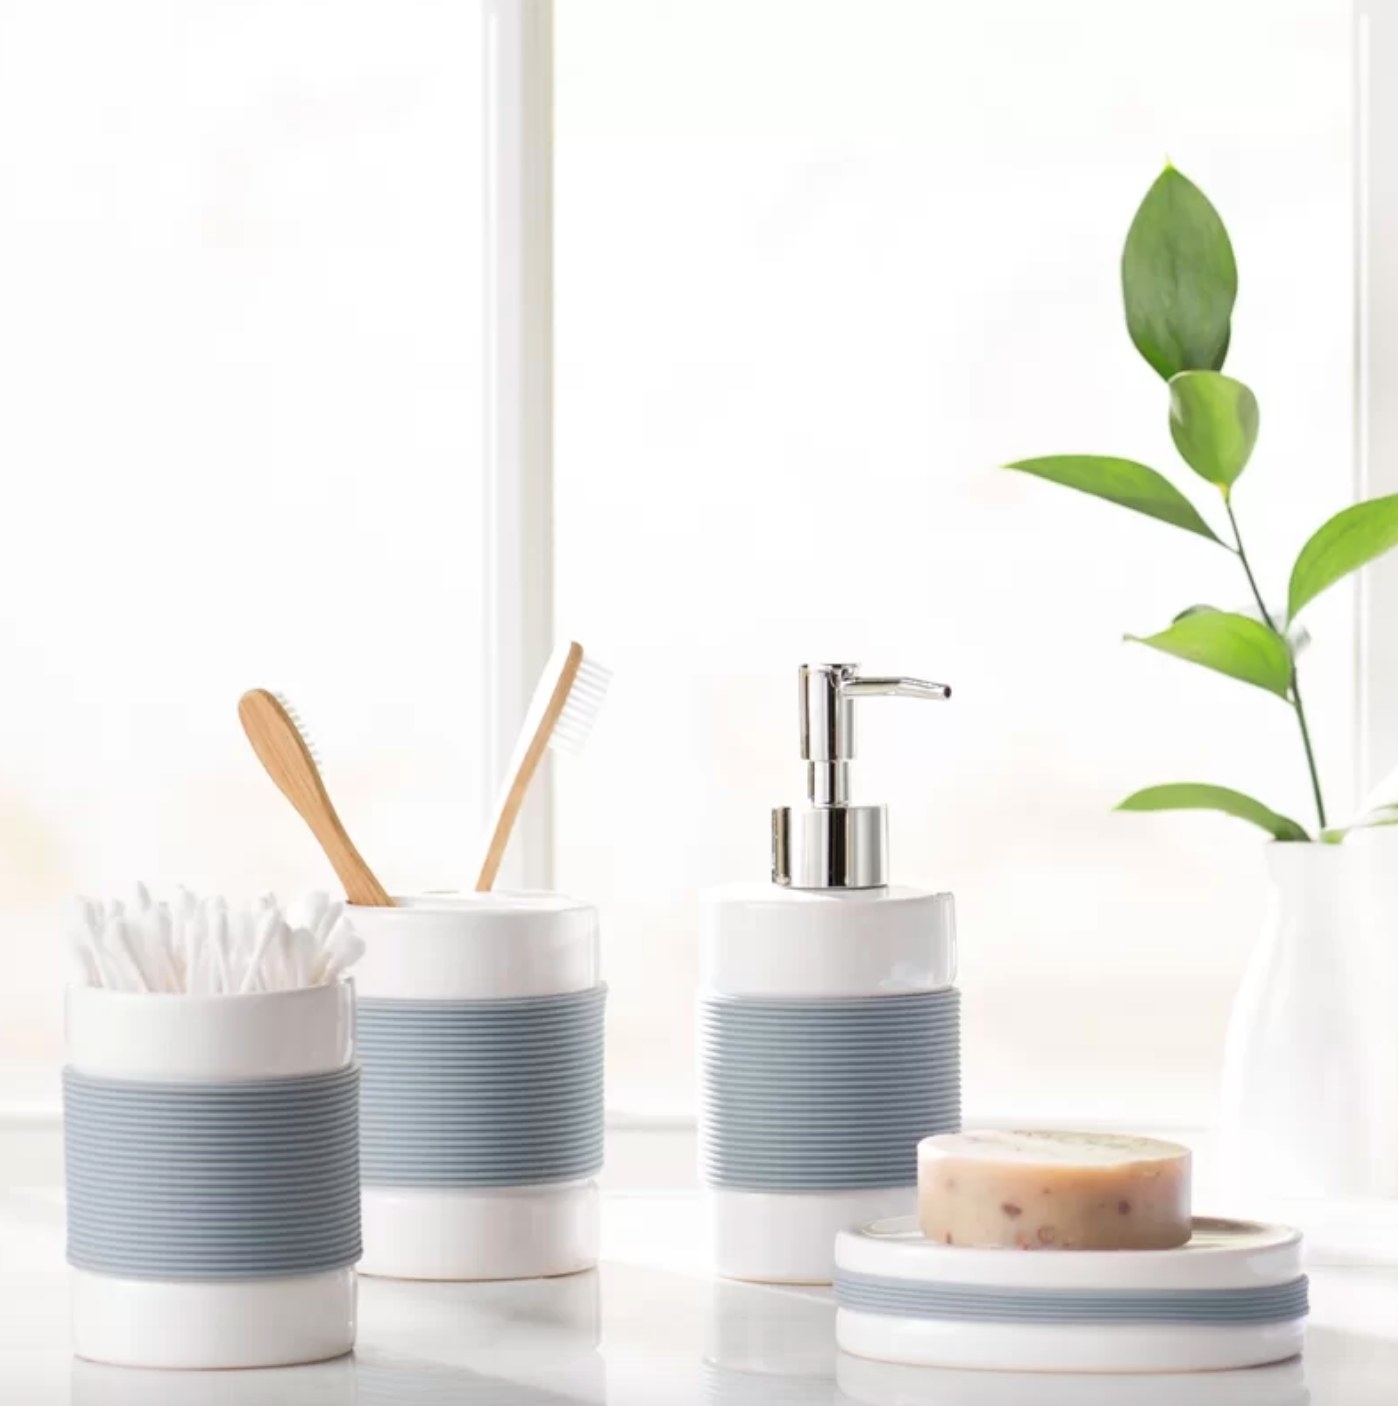 The four-piece bath accessory set in white and blue